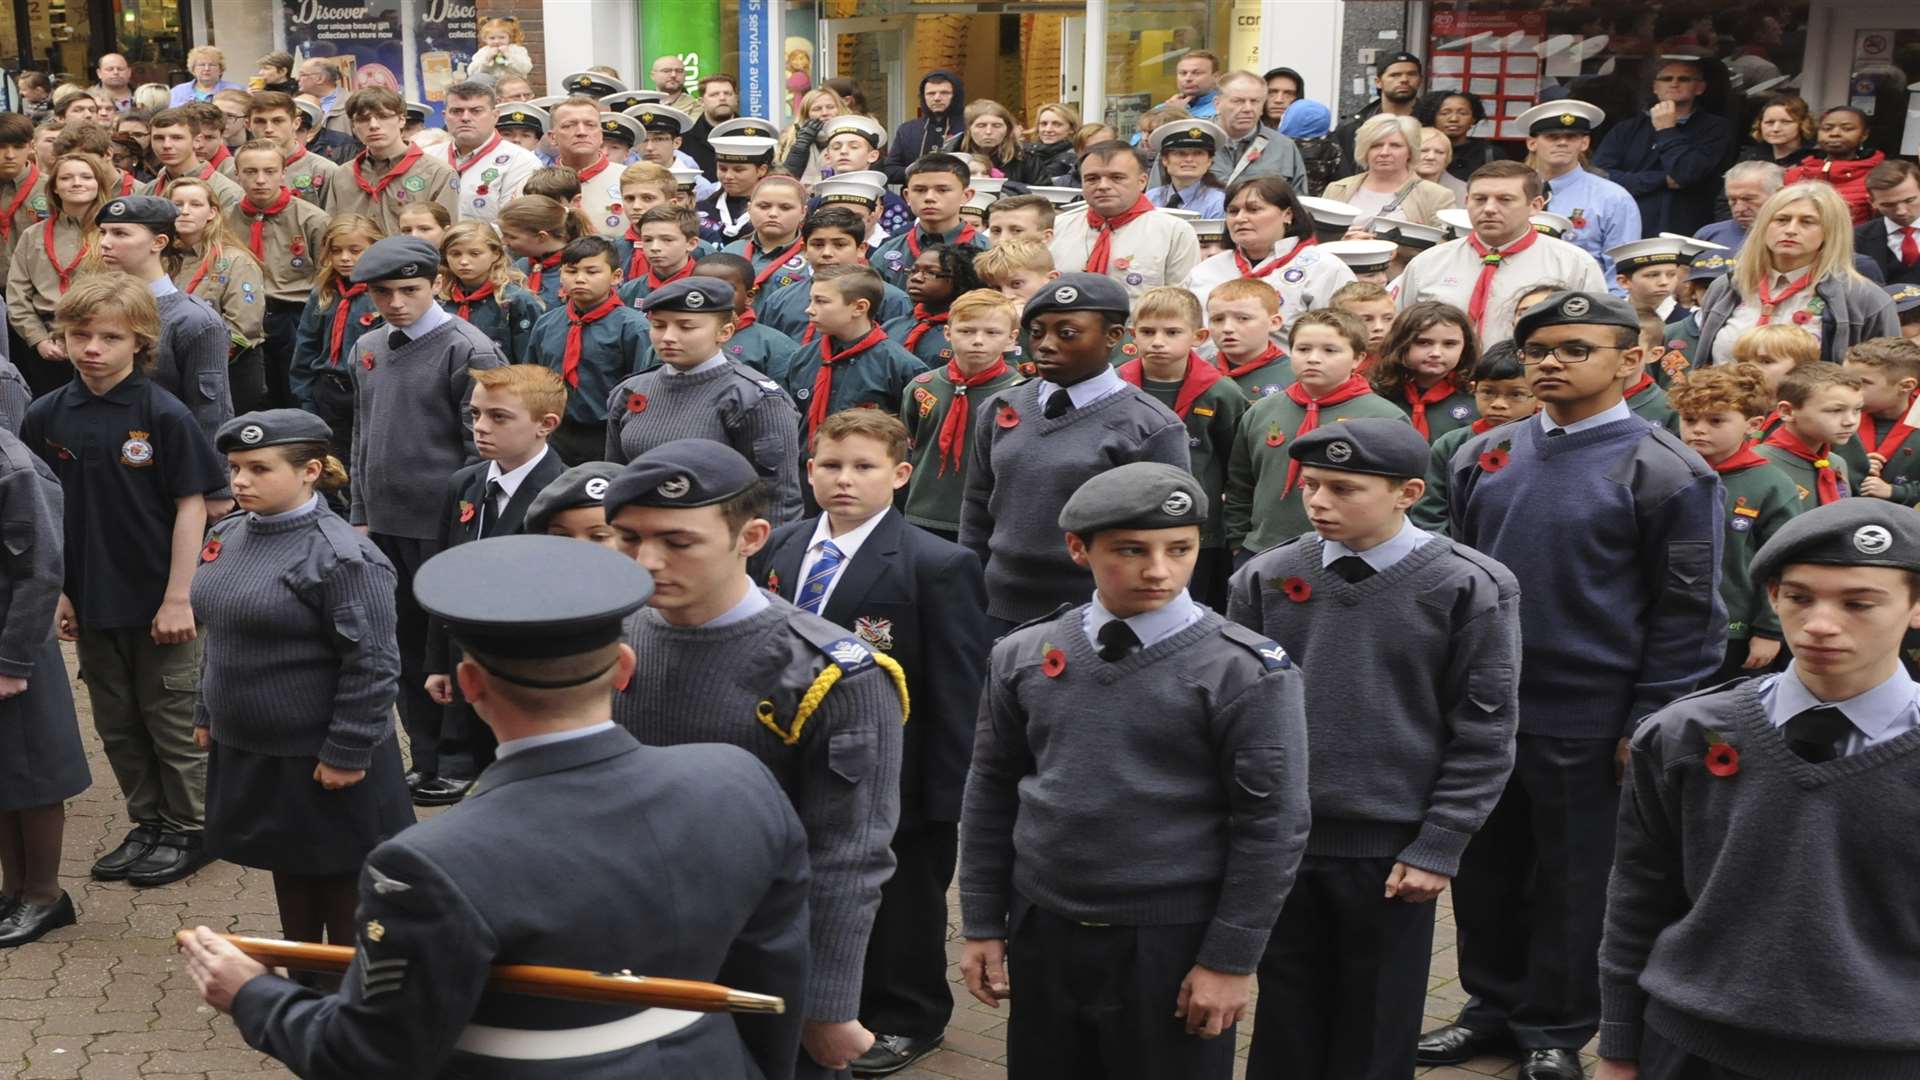 Hundreds took part in the Remembrance Sunday parade and service in Dartford